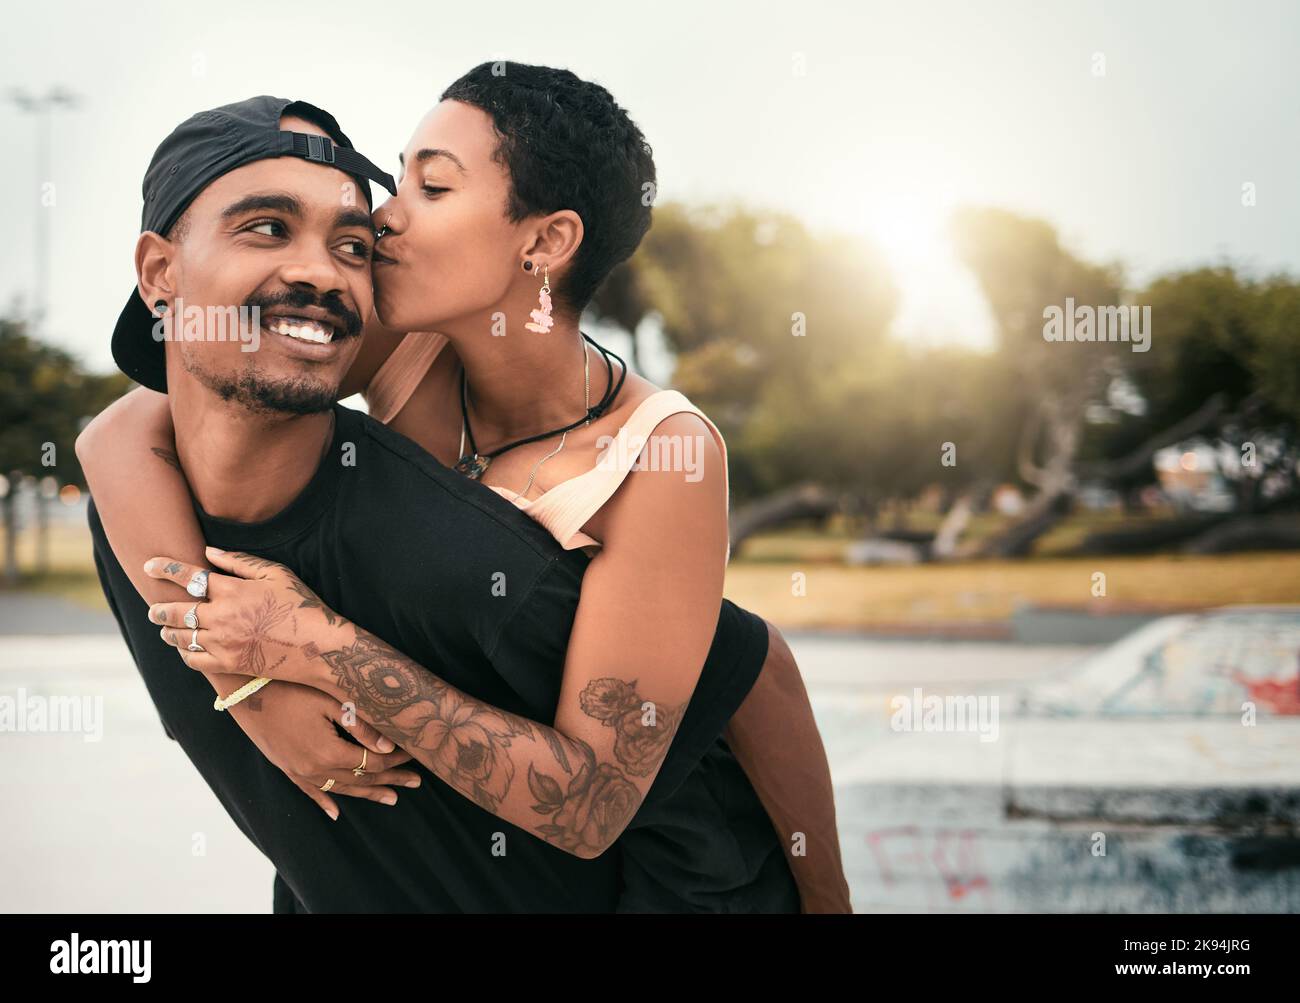 Black couple, hug and cheek kiss in city, affection or bonding together with smile. Love, romance and happy man and woman enjoying quality time Stock Photo